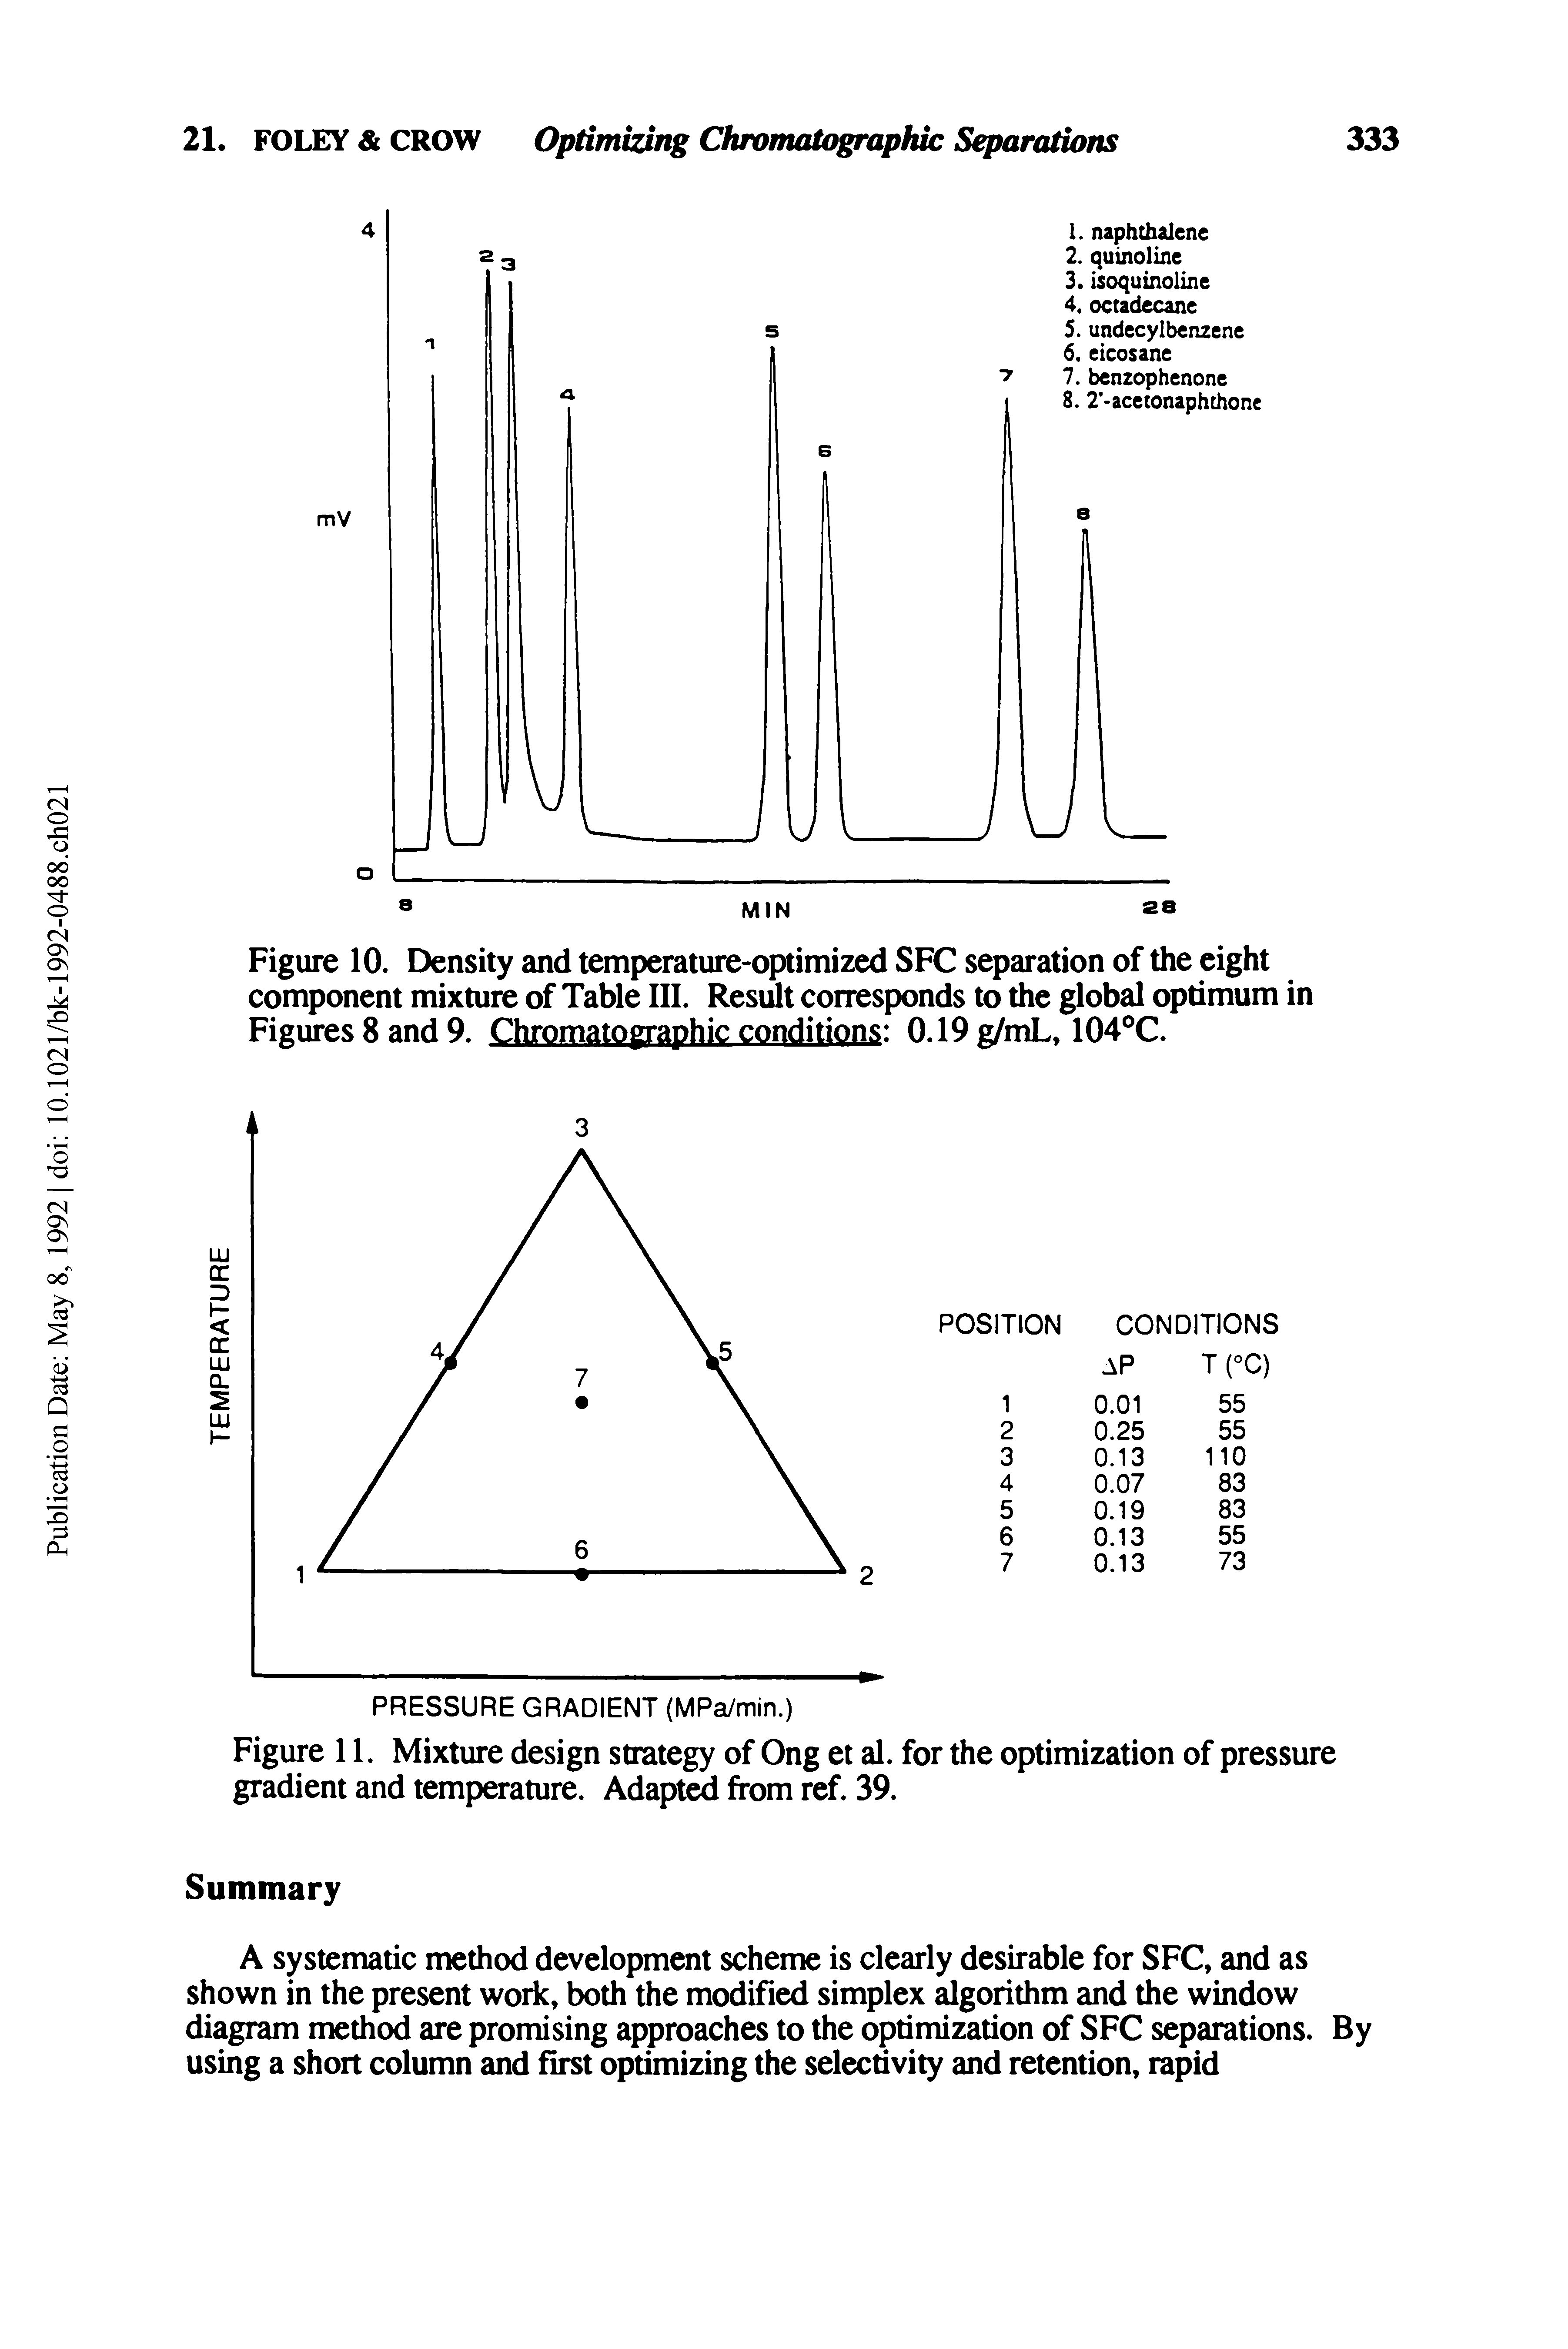 Figure 10. Density and temperature-optimized SFC separation of the eight component mixture of Table III. Result corresponds to the global optimum in Figures 8 and 9. Chromatographic conditions 0.19 g/mL, 104°C.